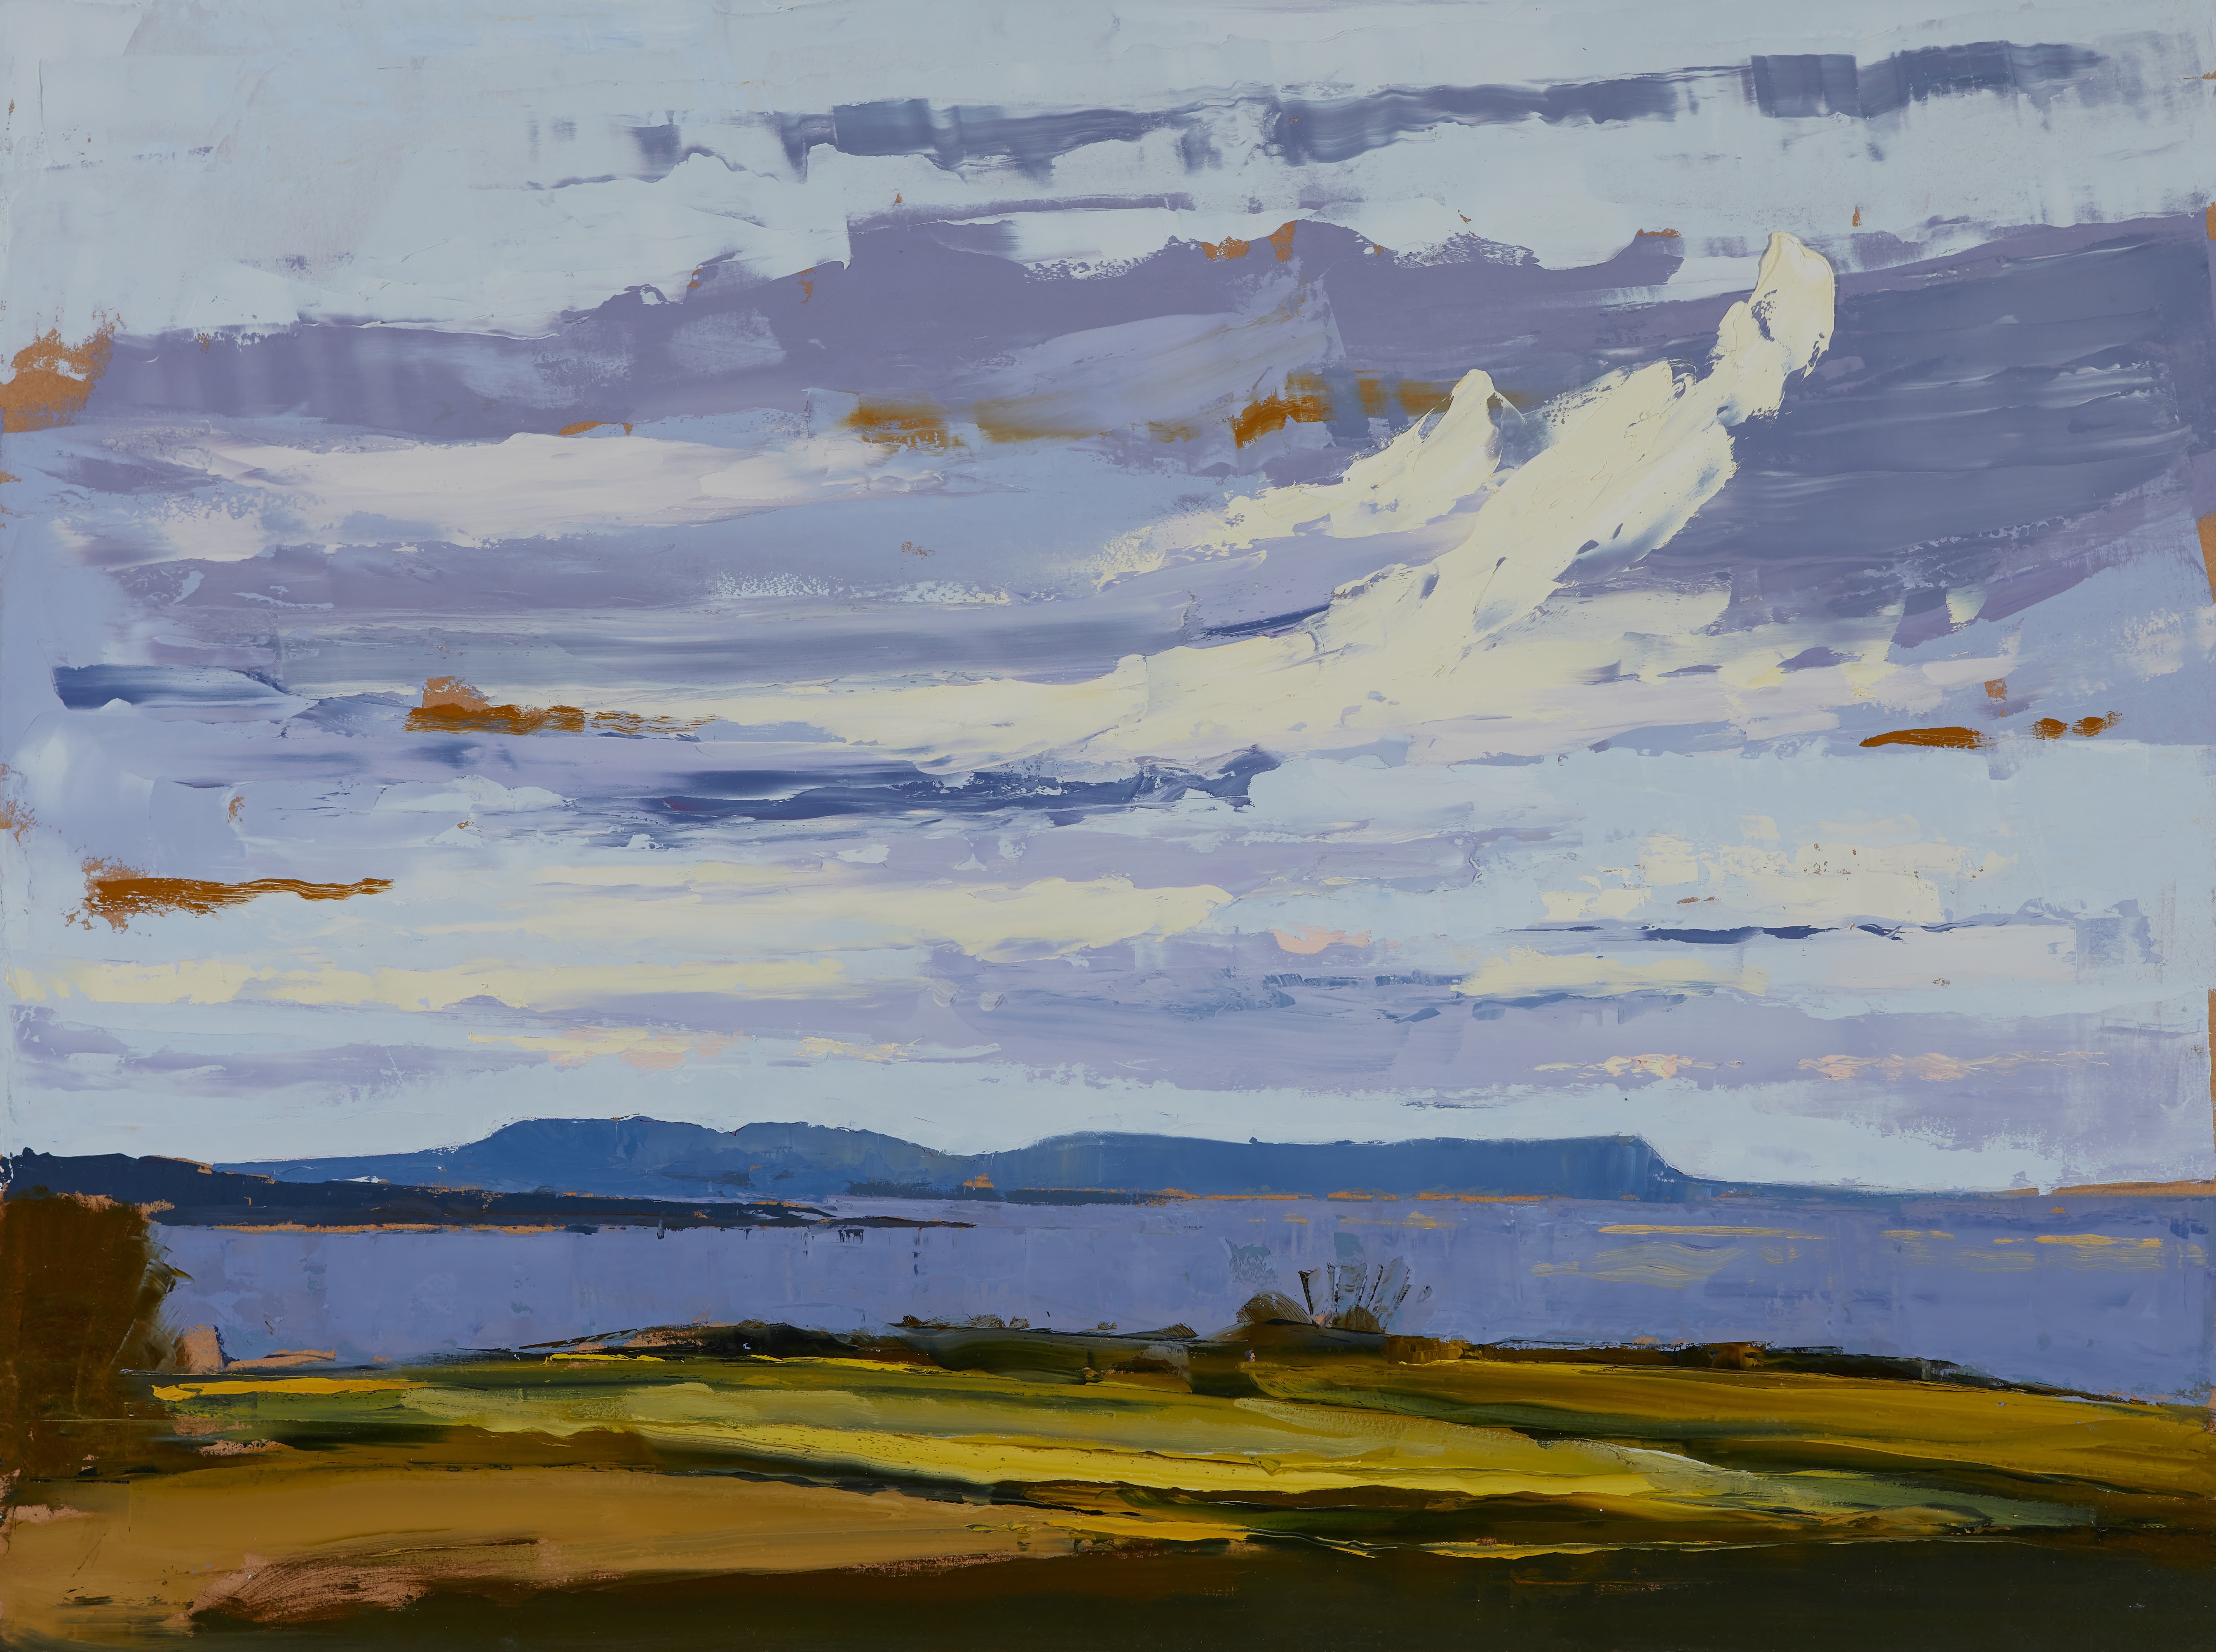 'Across Donegal Bay', oil on panel, 91cm x 122cm  (POA - price on application)